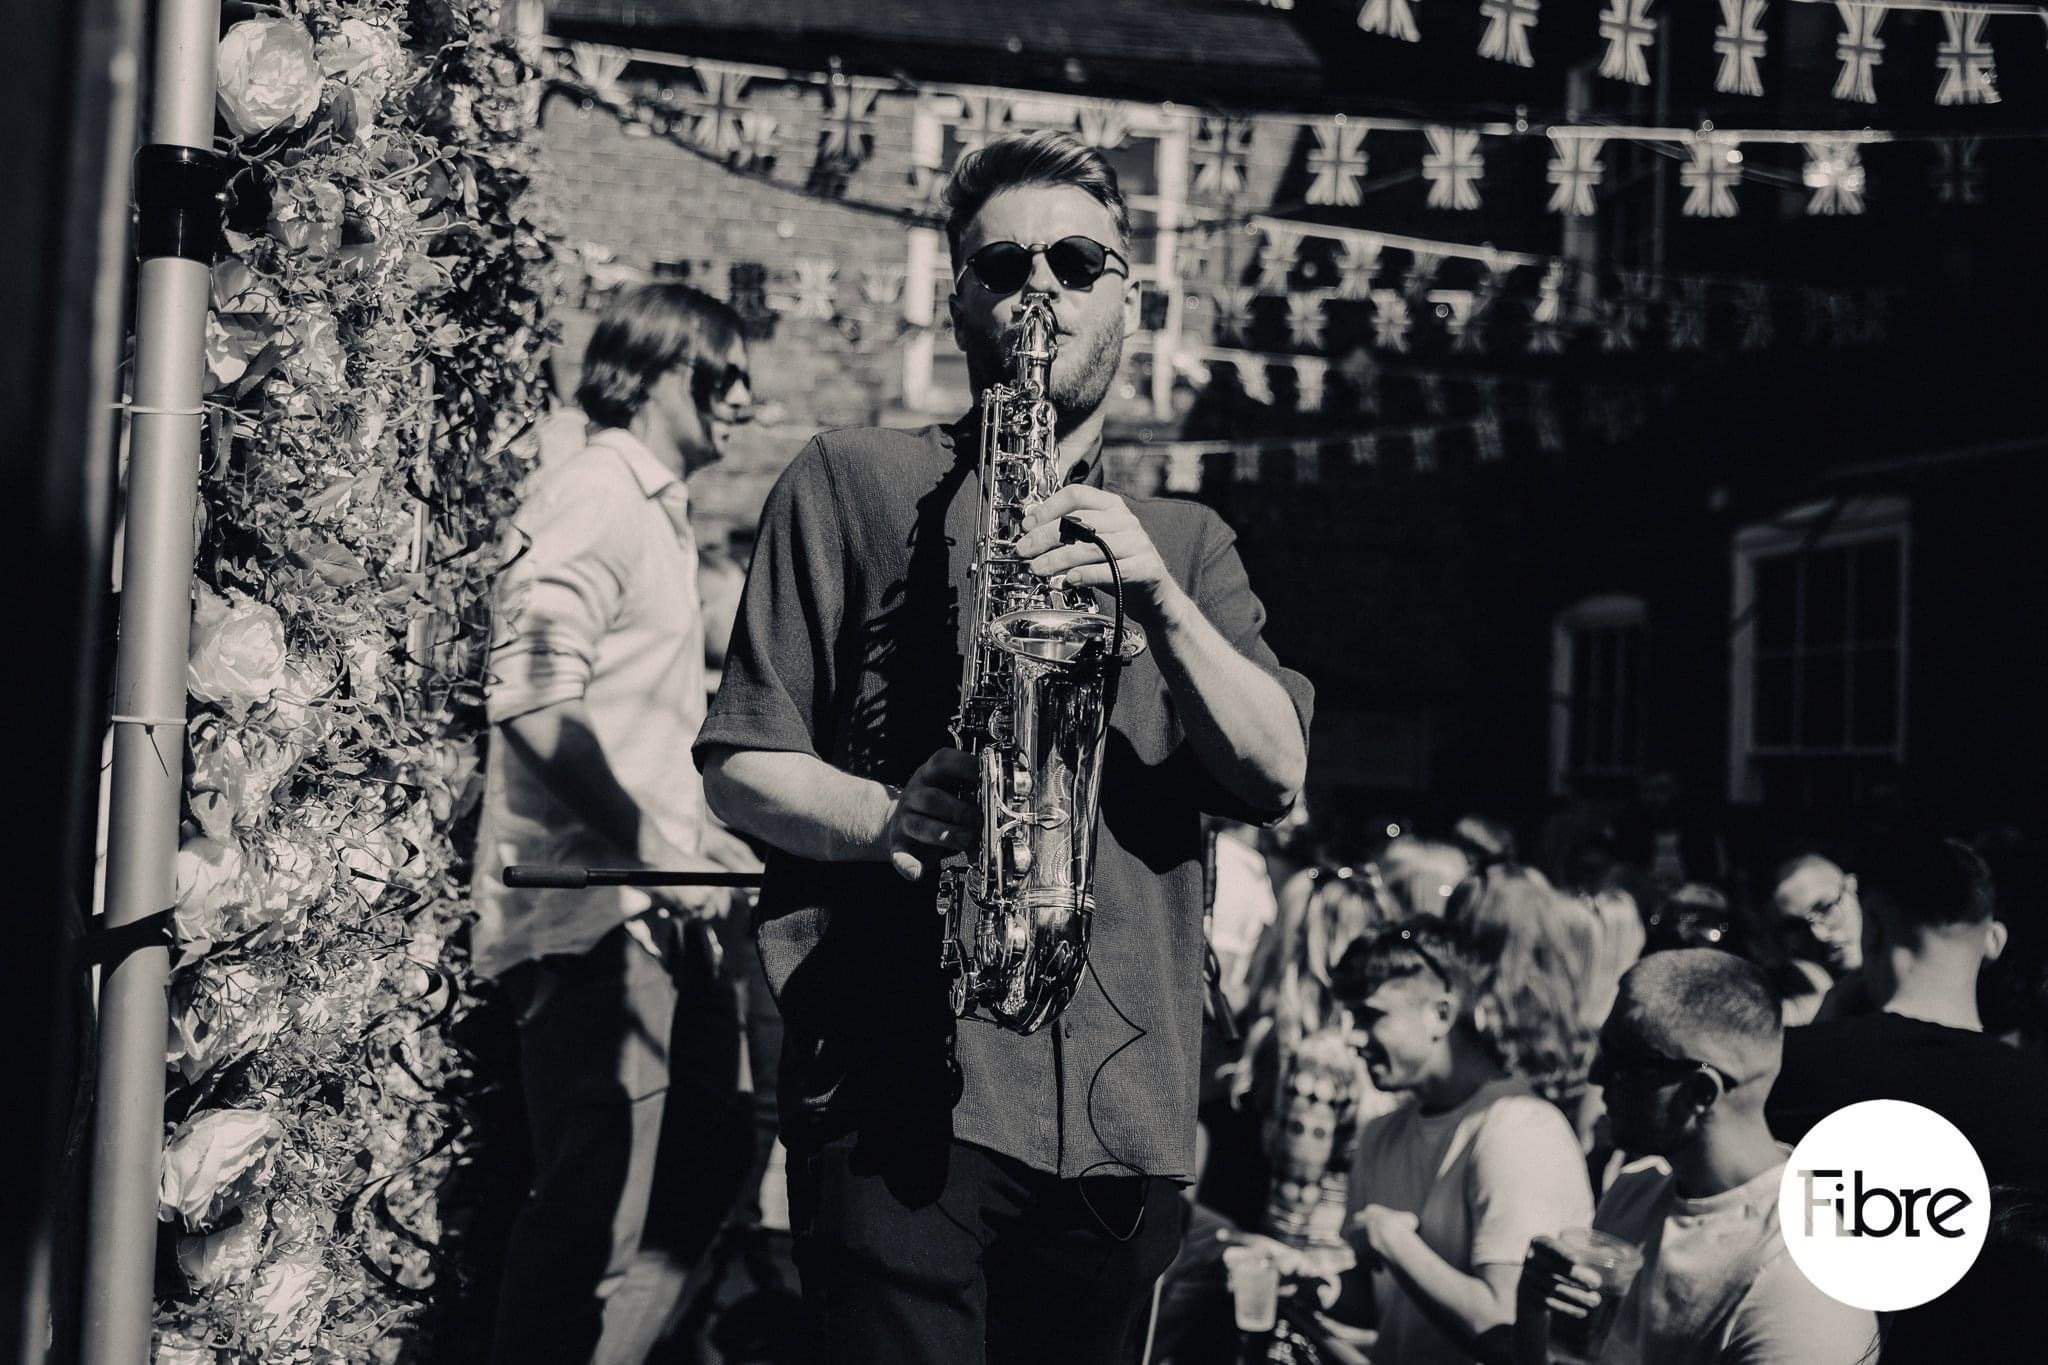  Black and white image of cool sax player entertaining wedding guests outside in the sunshine.    Photo by: Noah Rushbridge   